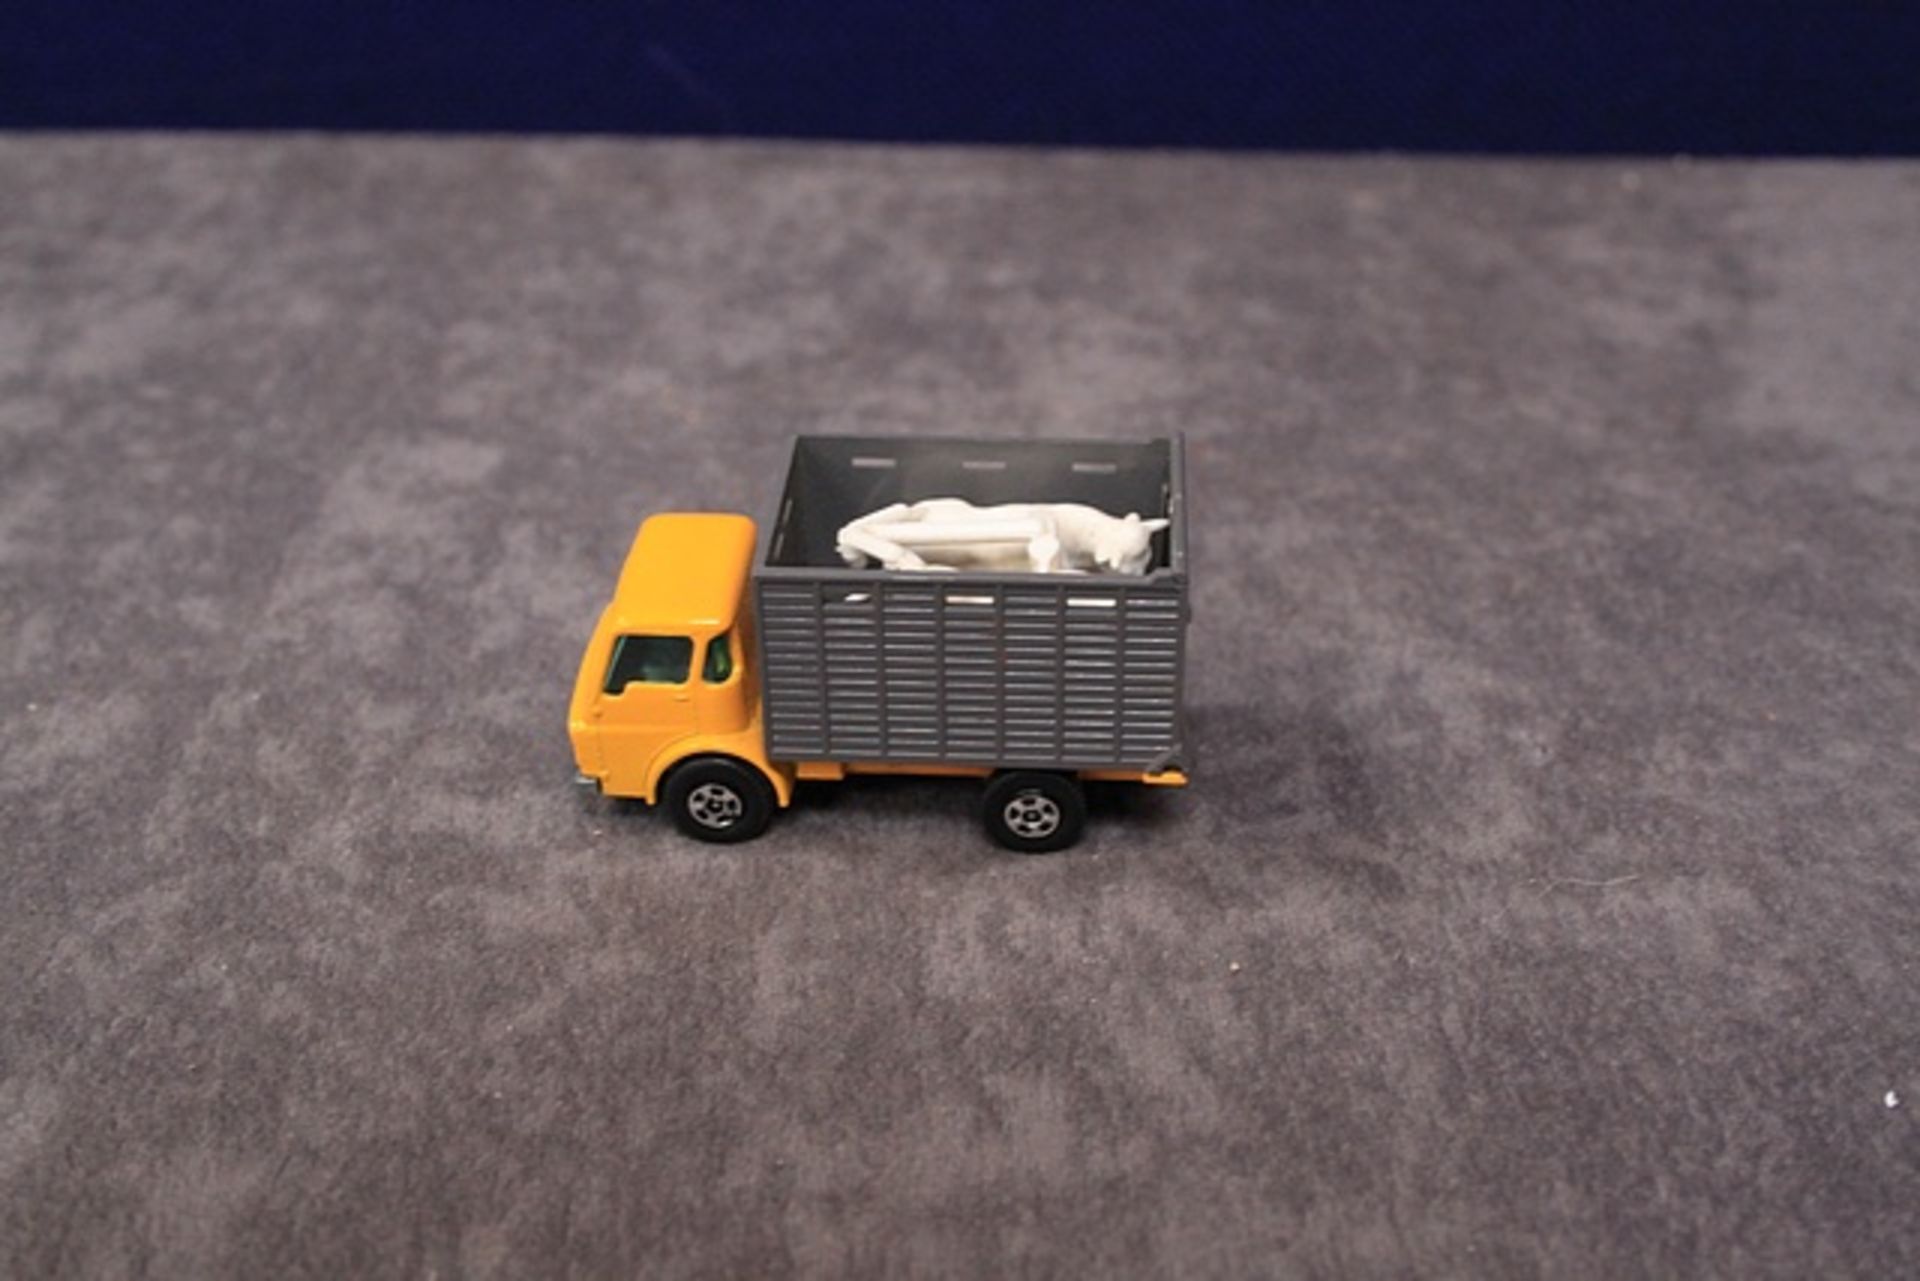 Mint Matchbox Superfast Diecast # 37 Cattle Truck In Yellow With Cattle In Crisp Box - Image 2 of 3